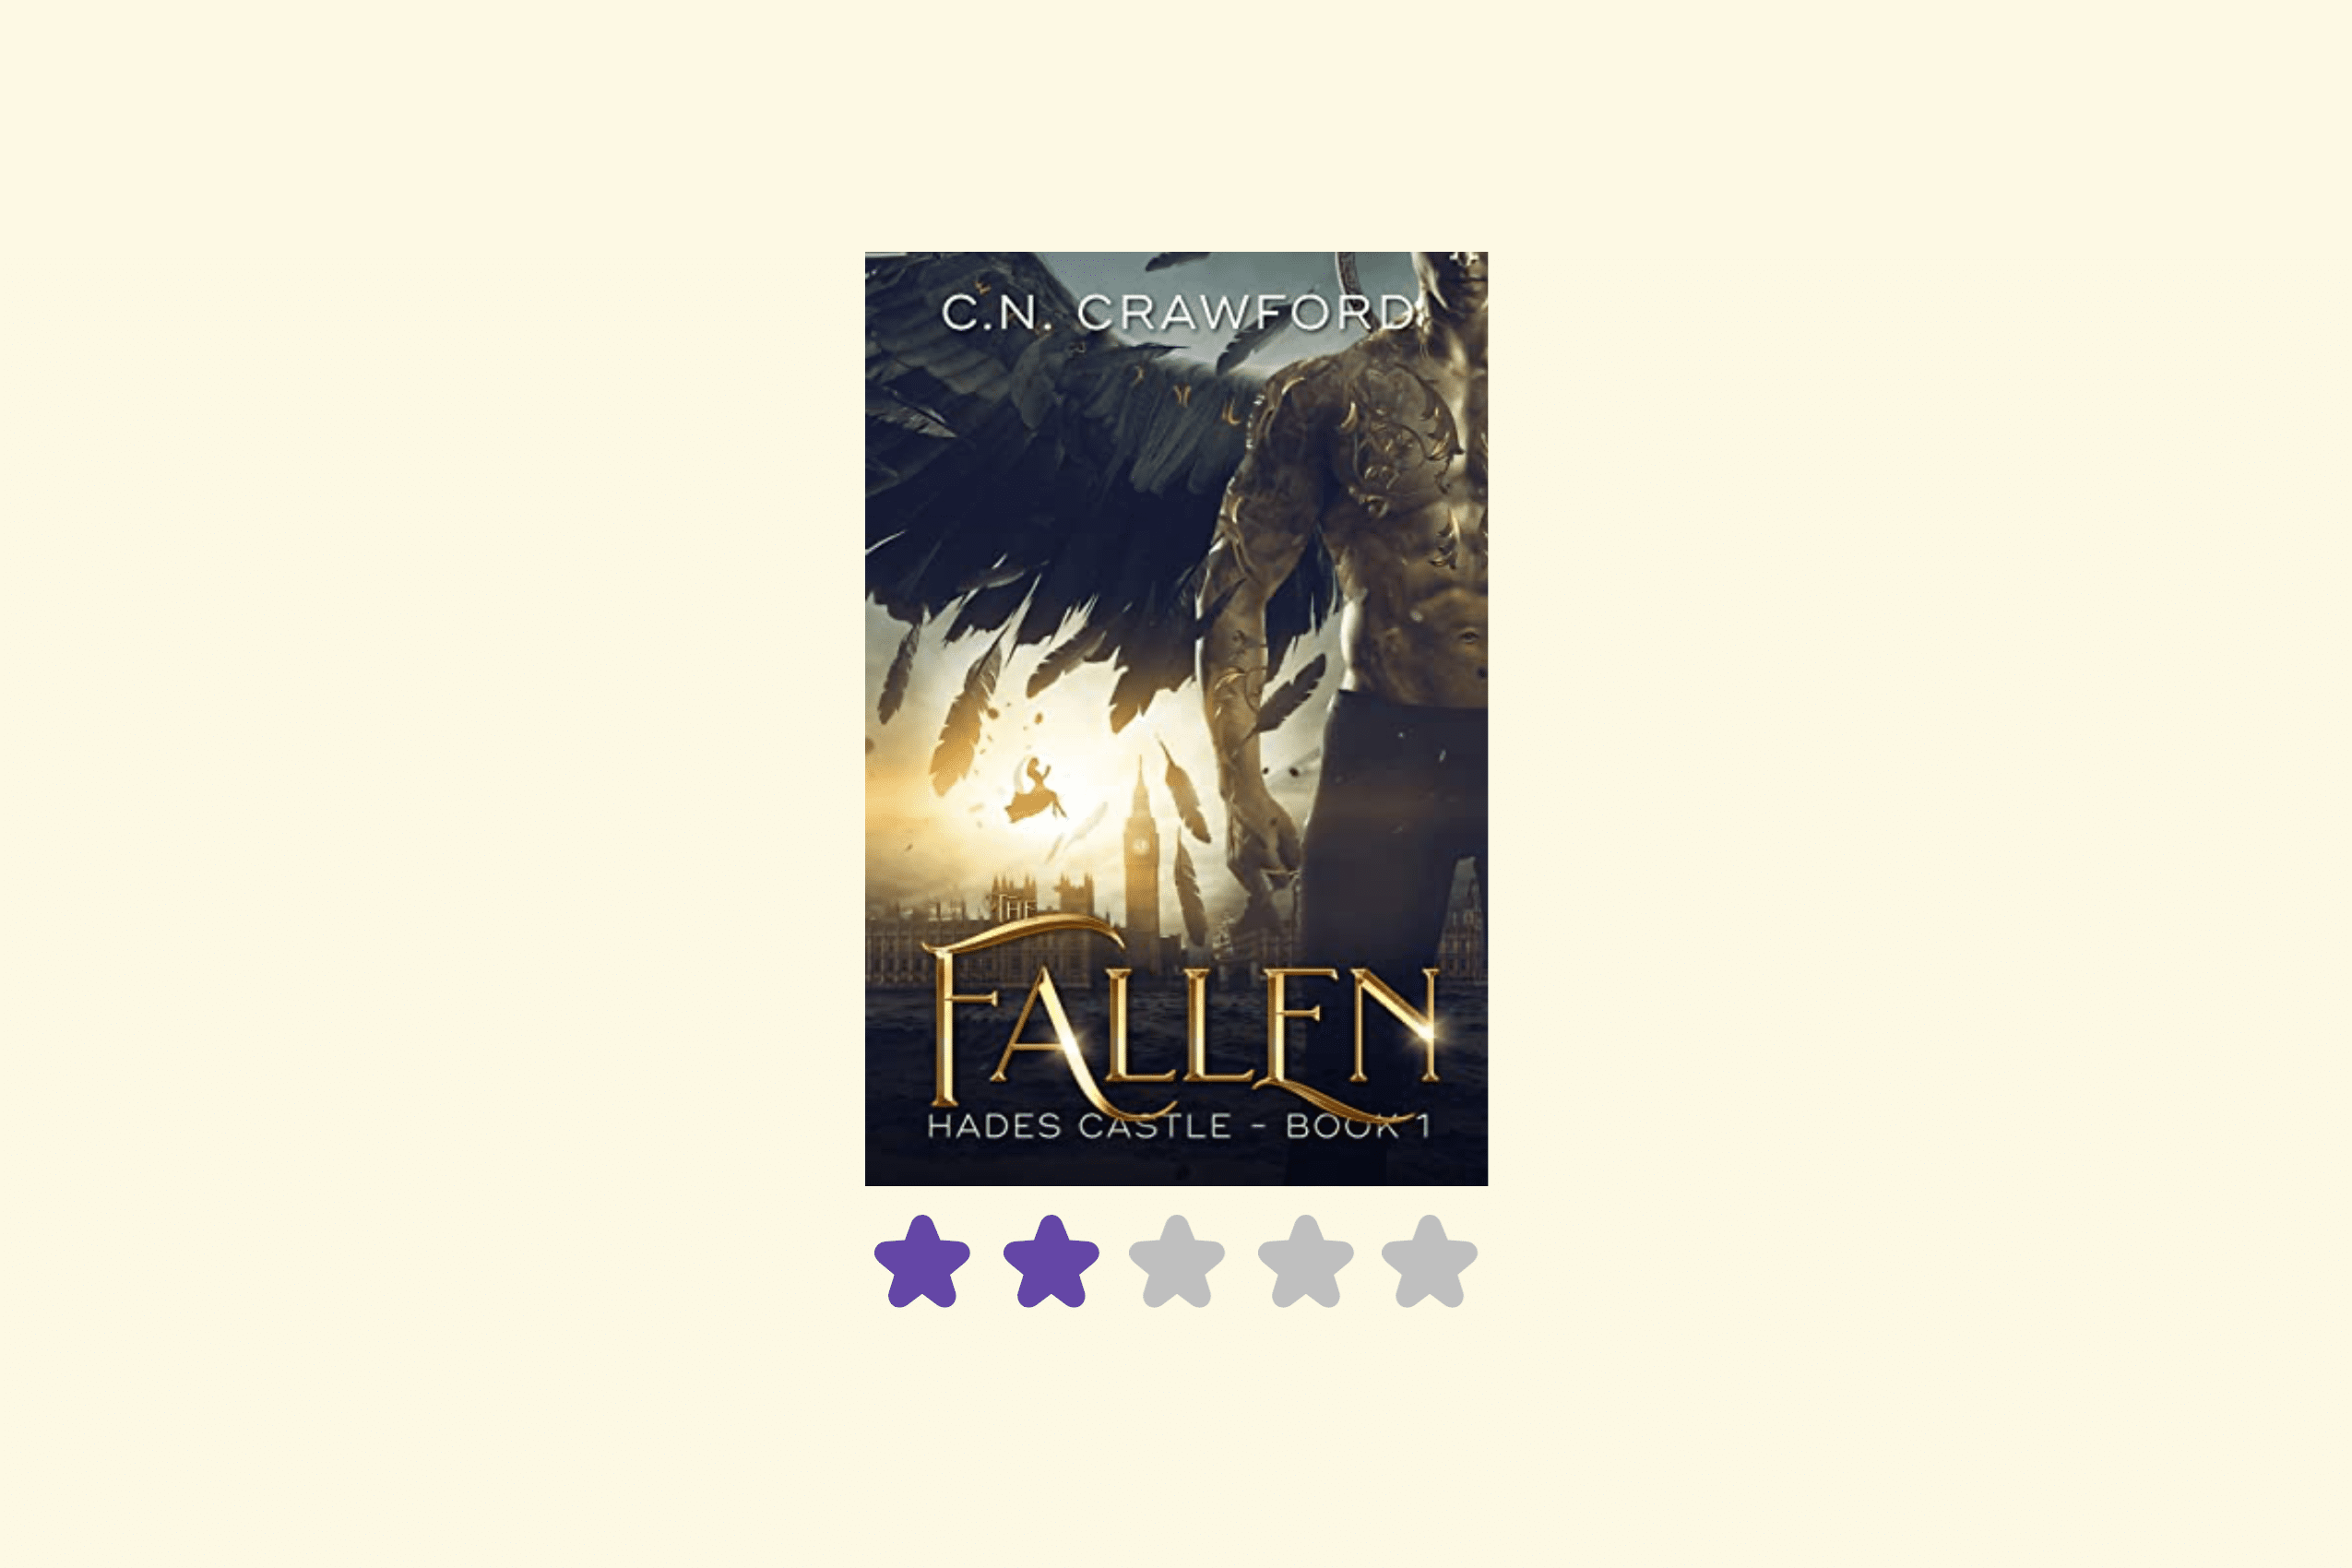 The Fallen (Hades Castle Trilogy #1) by C.N. Crawford